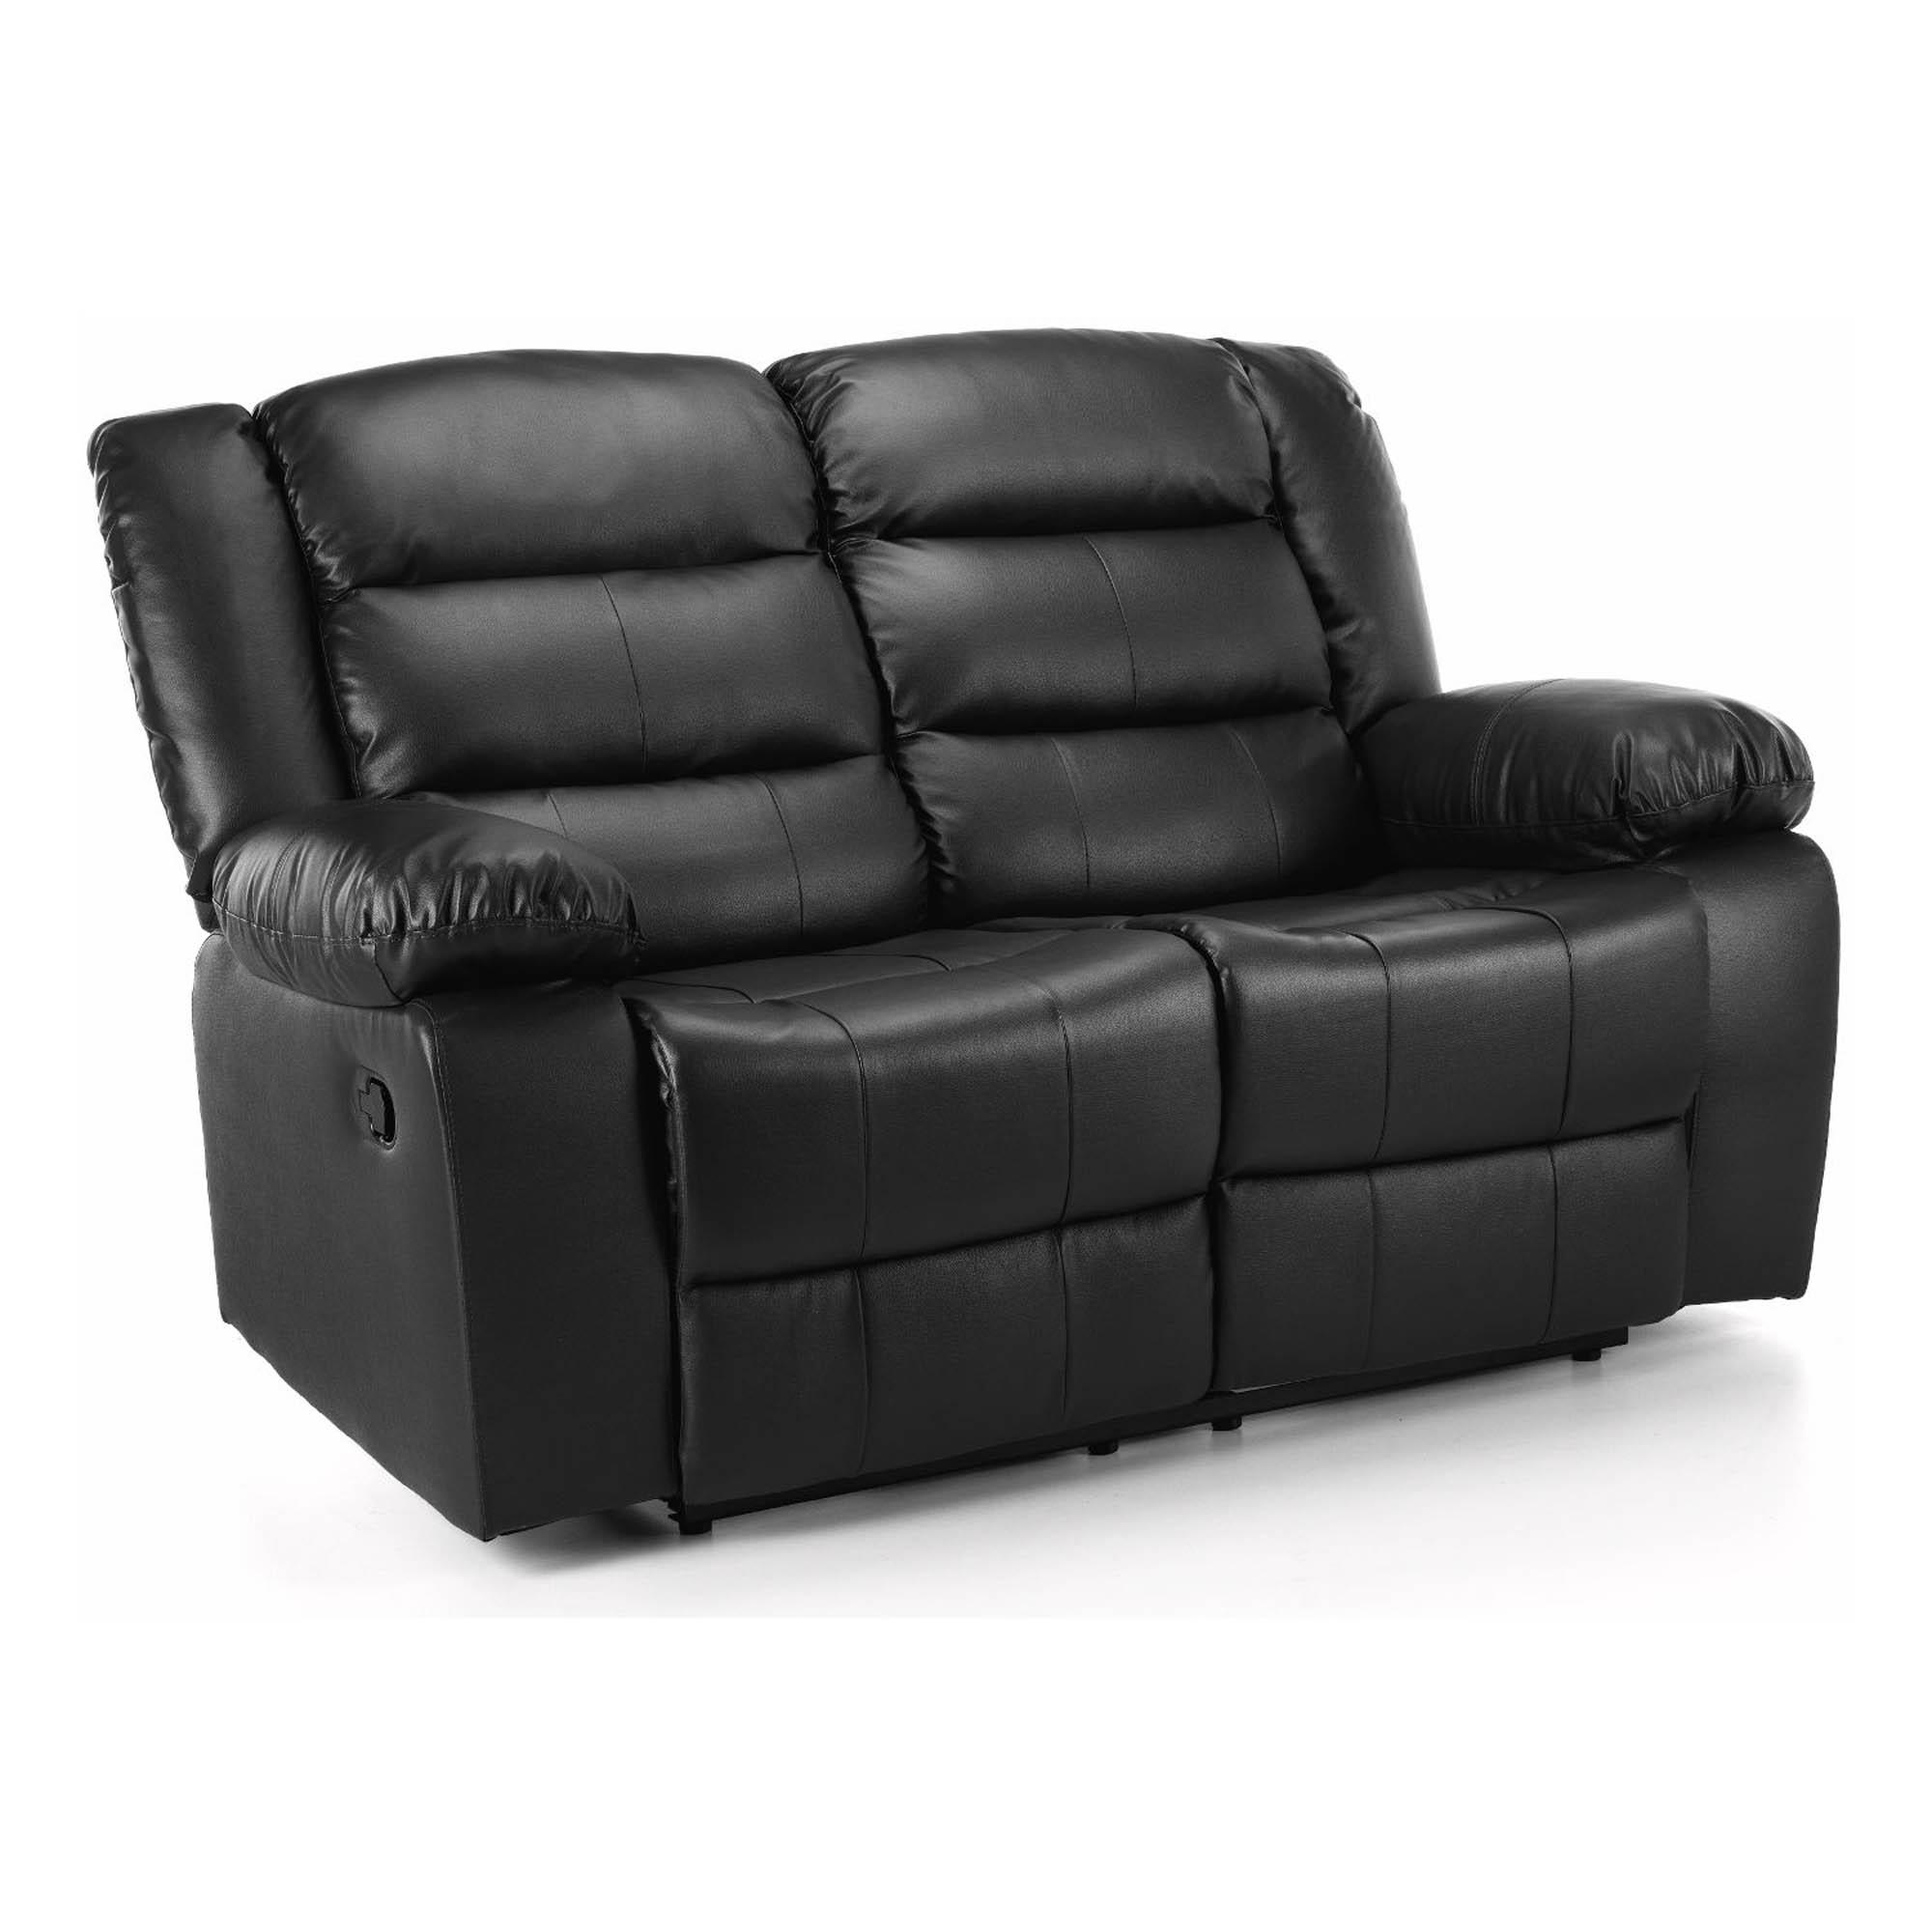 Whitfield 2 Seater Leather Reclining Sofa